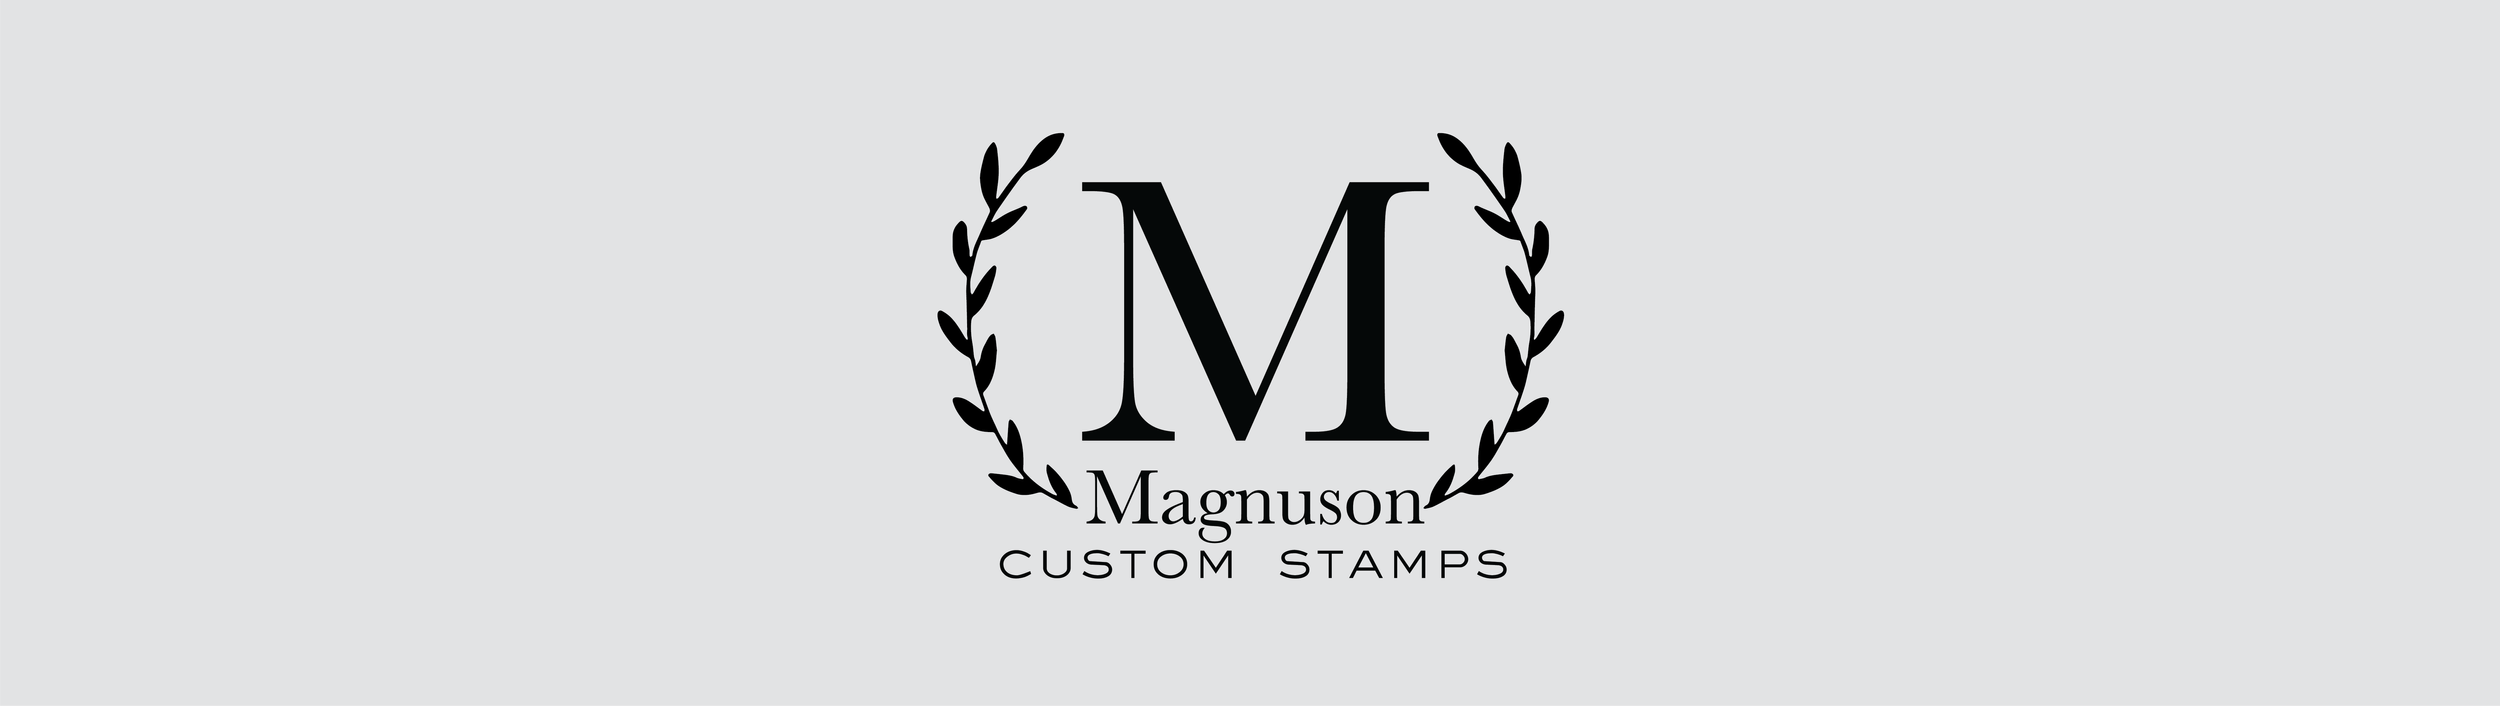 How to Make a Custom Rubber Stamp, Personalized Rubber Stamps, Custom Logo Rubber  Stamp